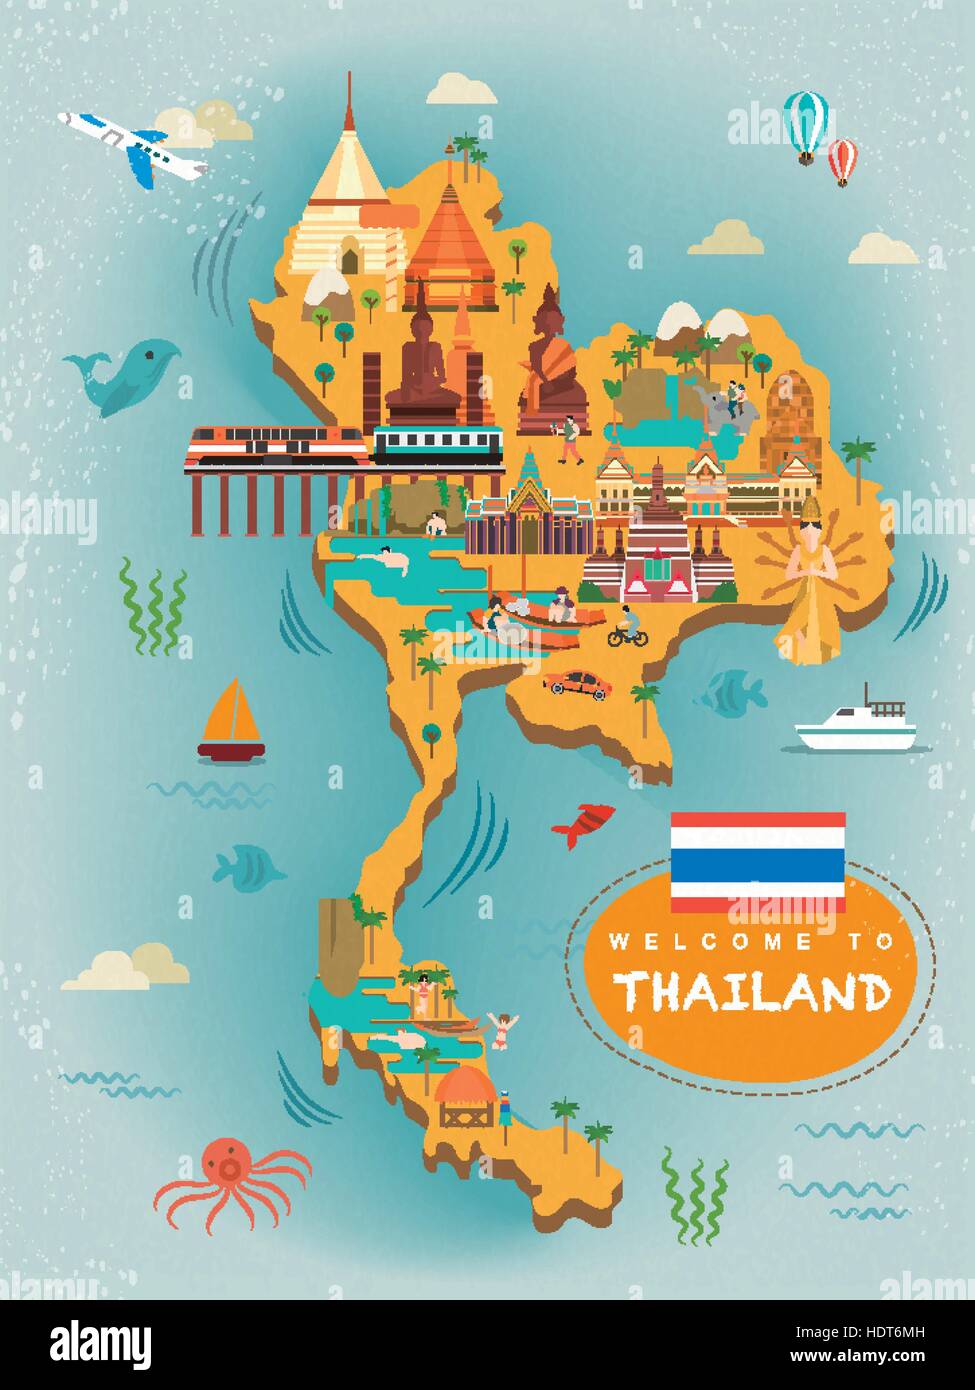 adorable Thailand travel concept poster in flat style Stock Vector